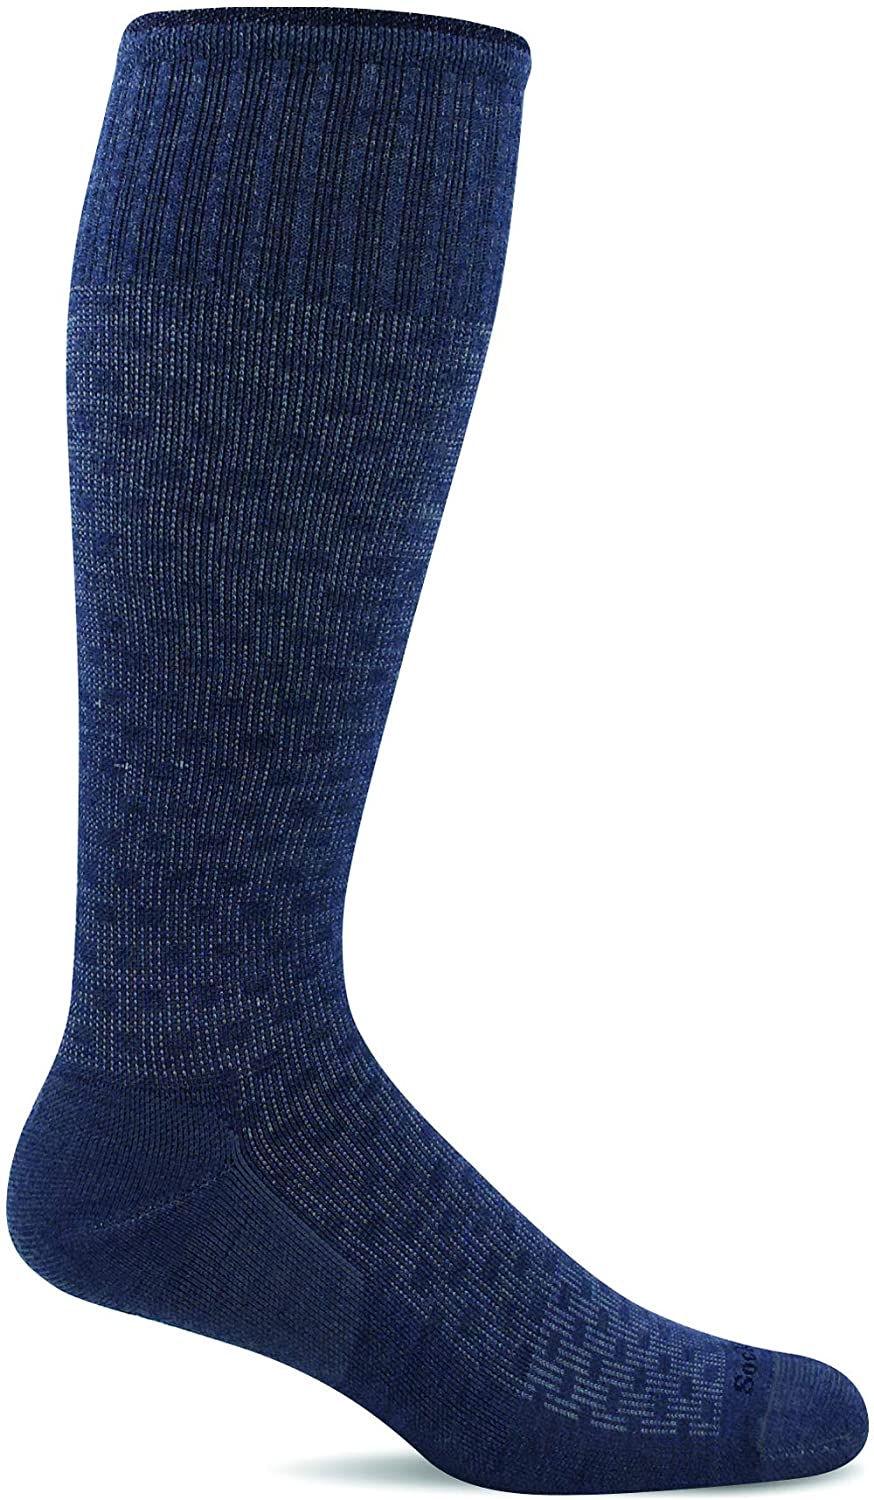 Sockwell Men's Shadow Box Moderate Graduated Compression Sock in Denim from the side